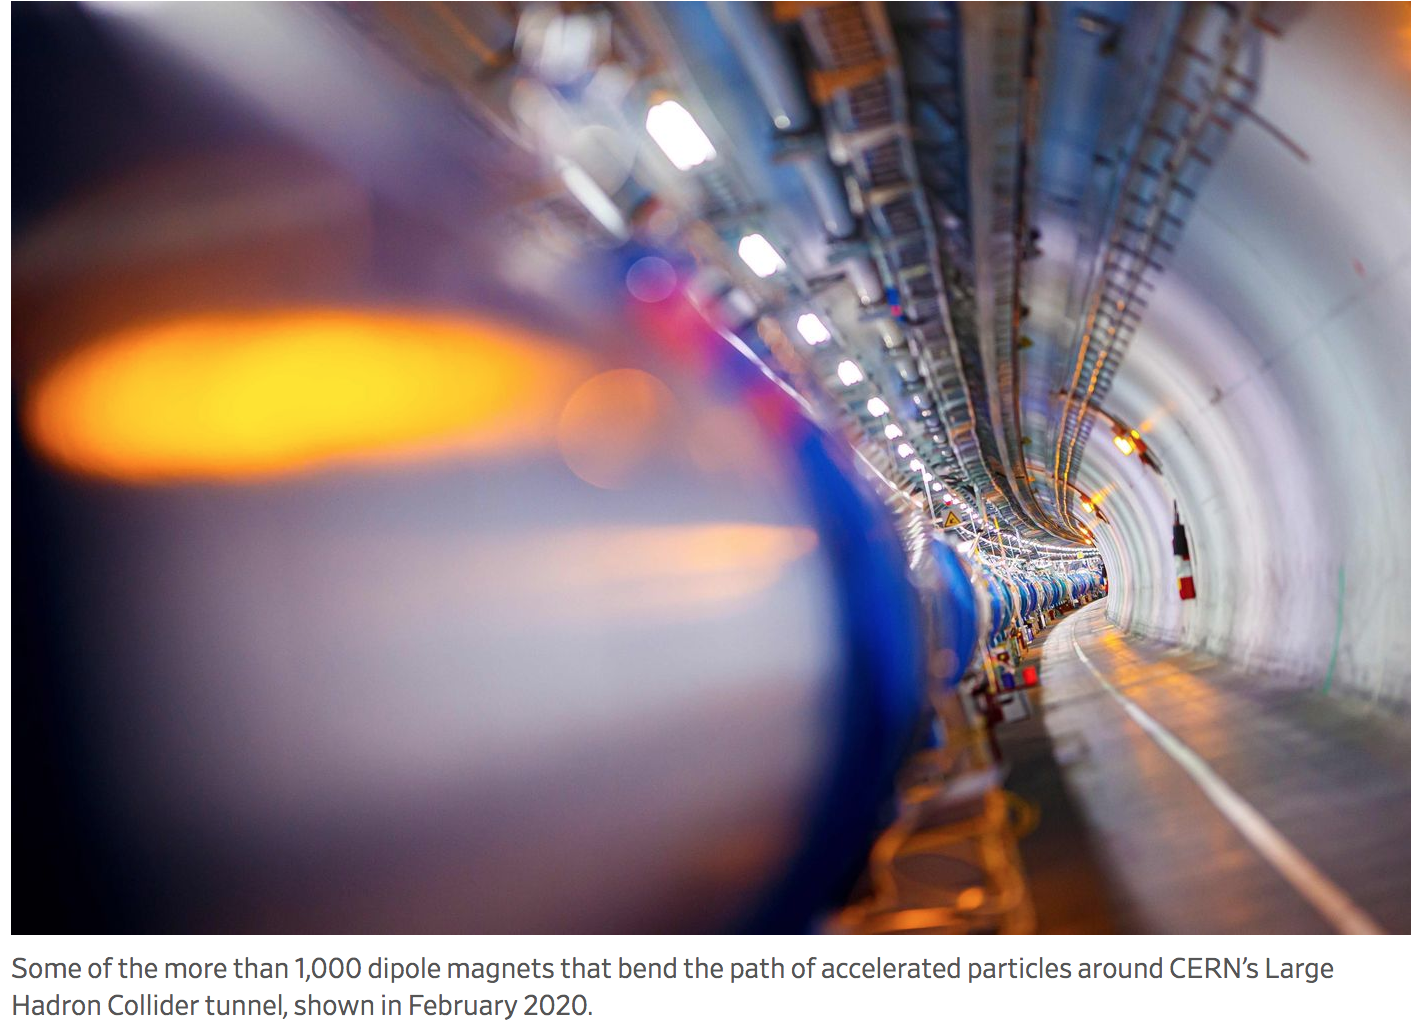 CERN’s Large Hadron Collider To Restart In Bid To Extend Frontiers Of Physics